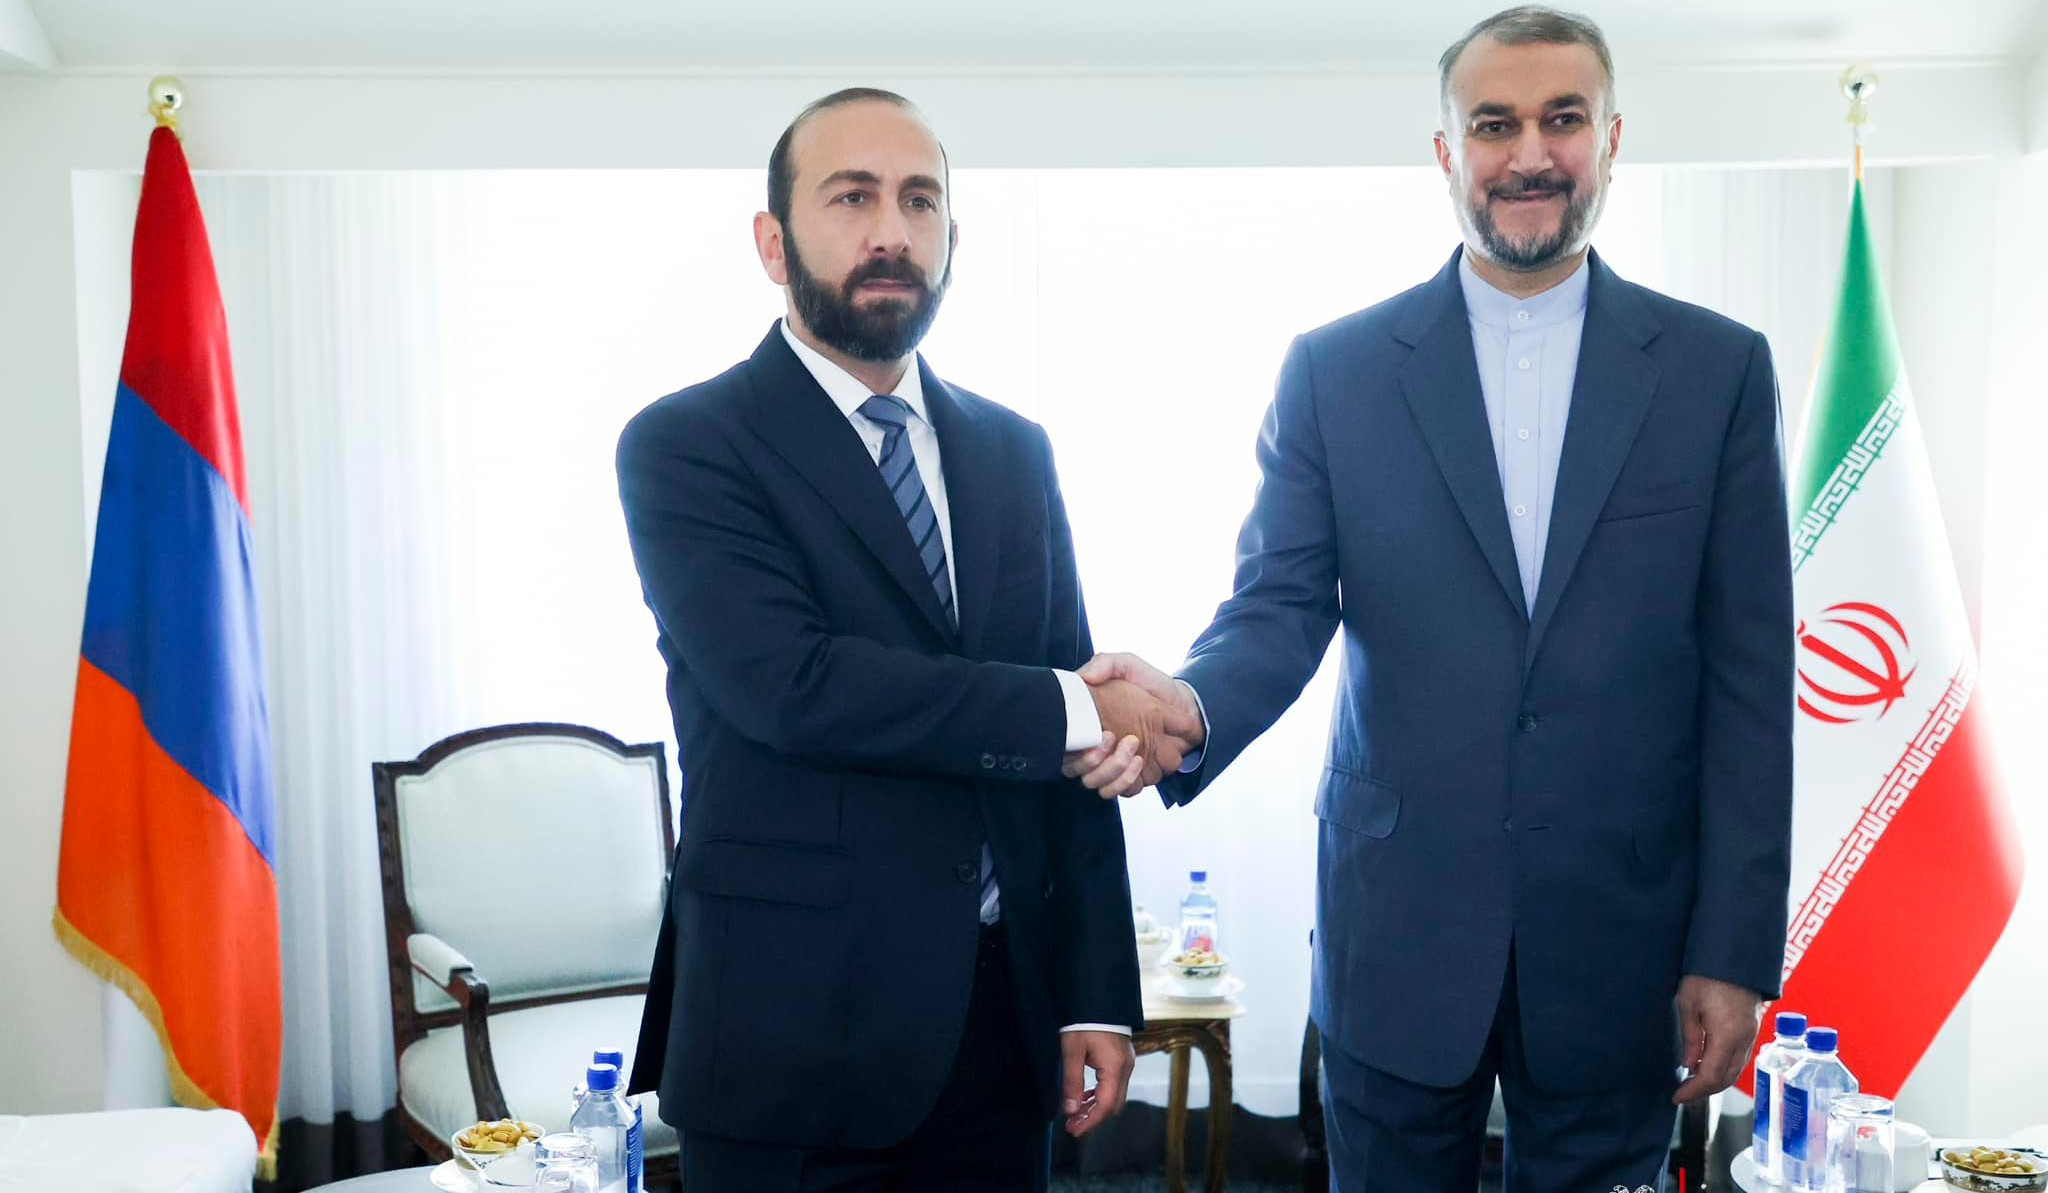 Ararat Mirzoyan met with Foreign Minister of Iran within framework of 78th session of UN General Assembly